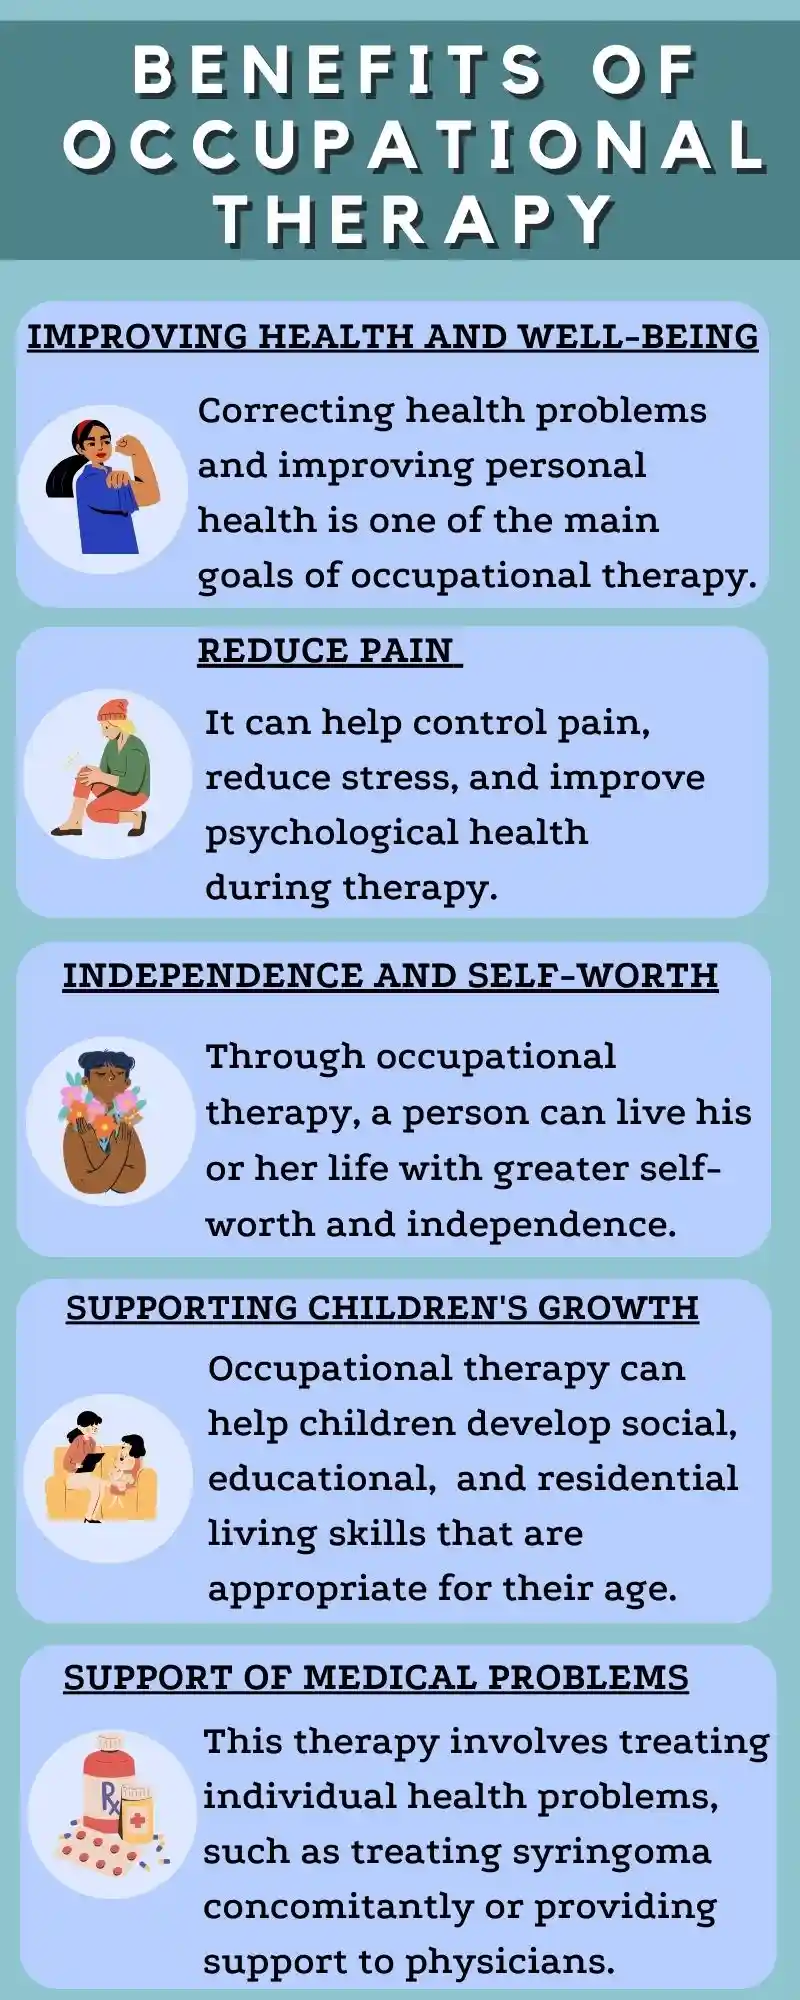 Top 5 Benefits of Occupational Therapy